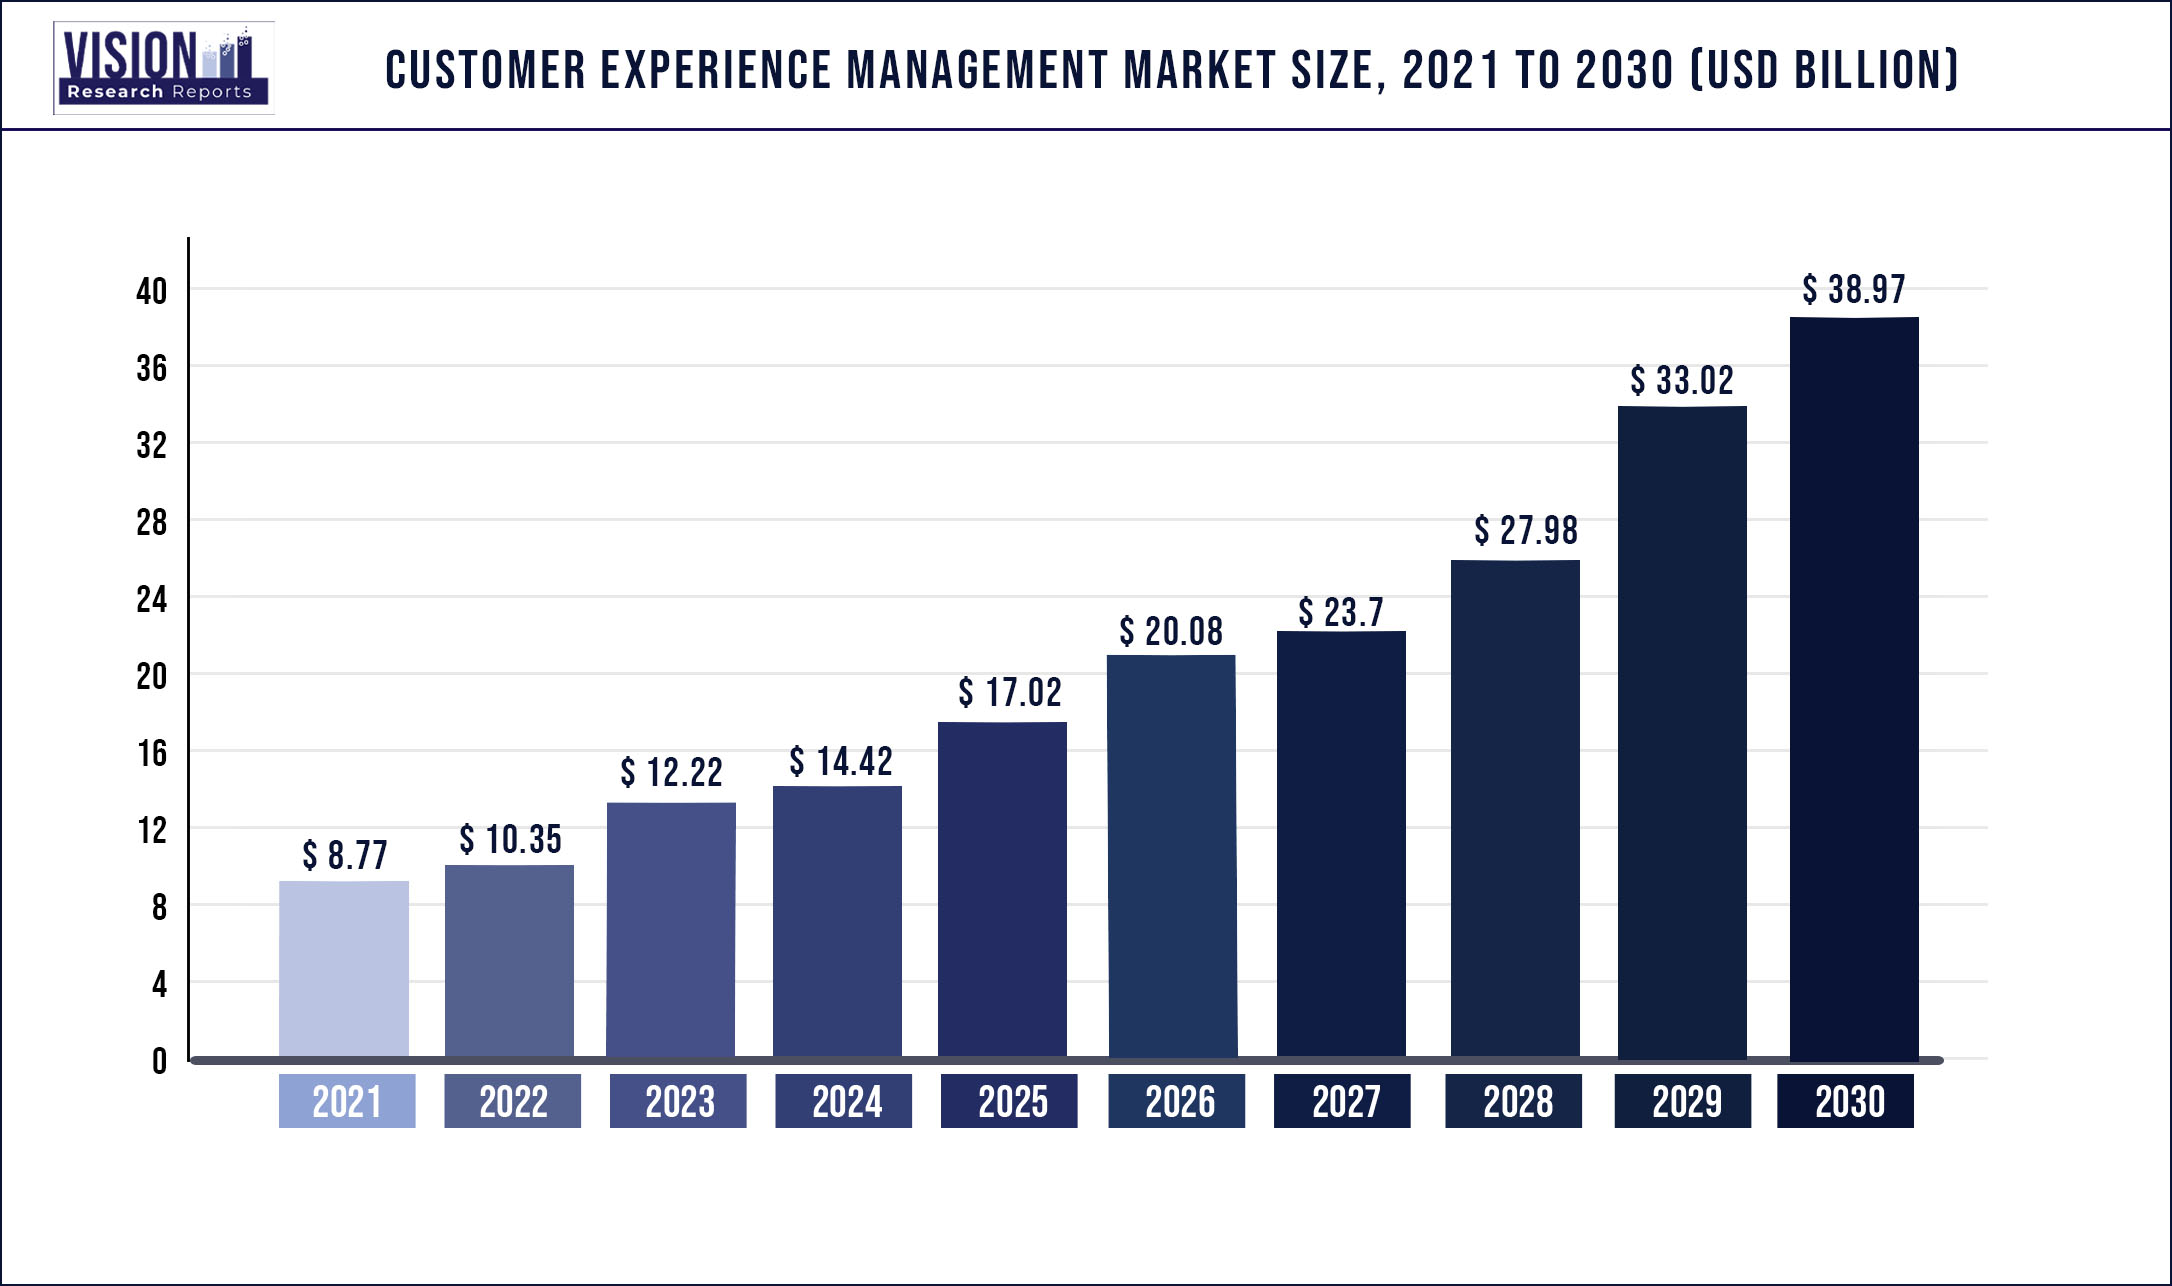 Customer Experience Management Market Size 2021 to 2030